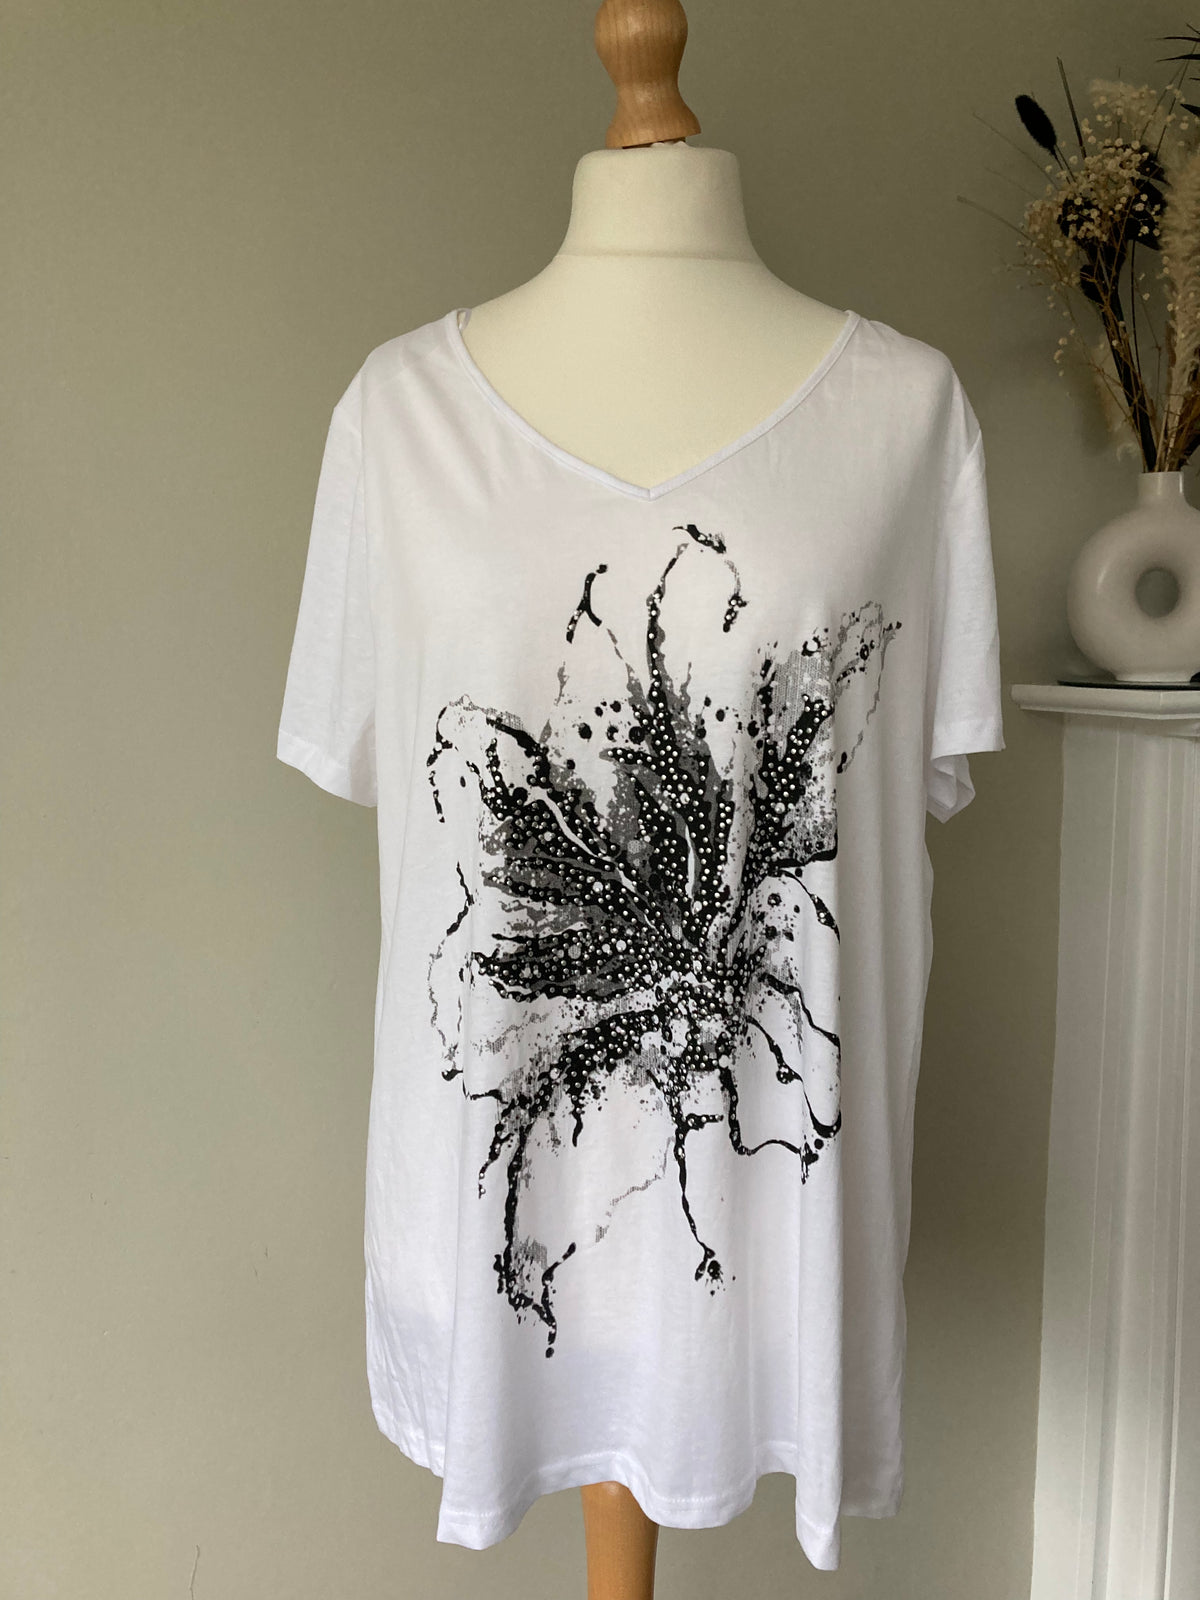 White top with black flower design - Size 18